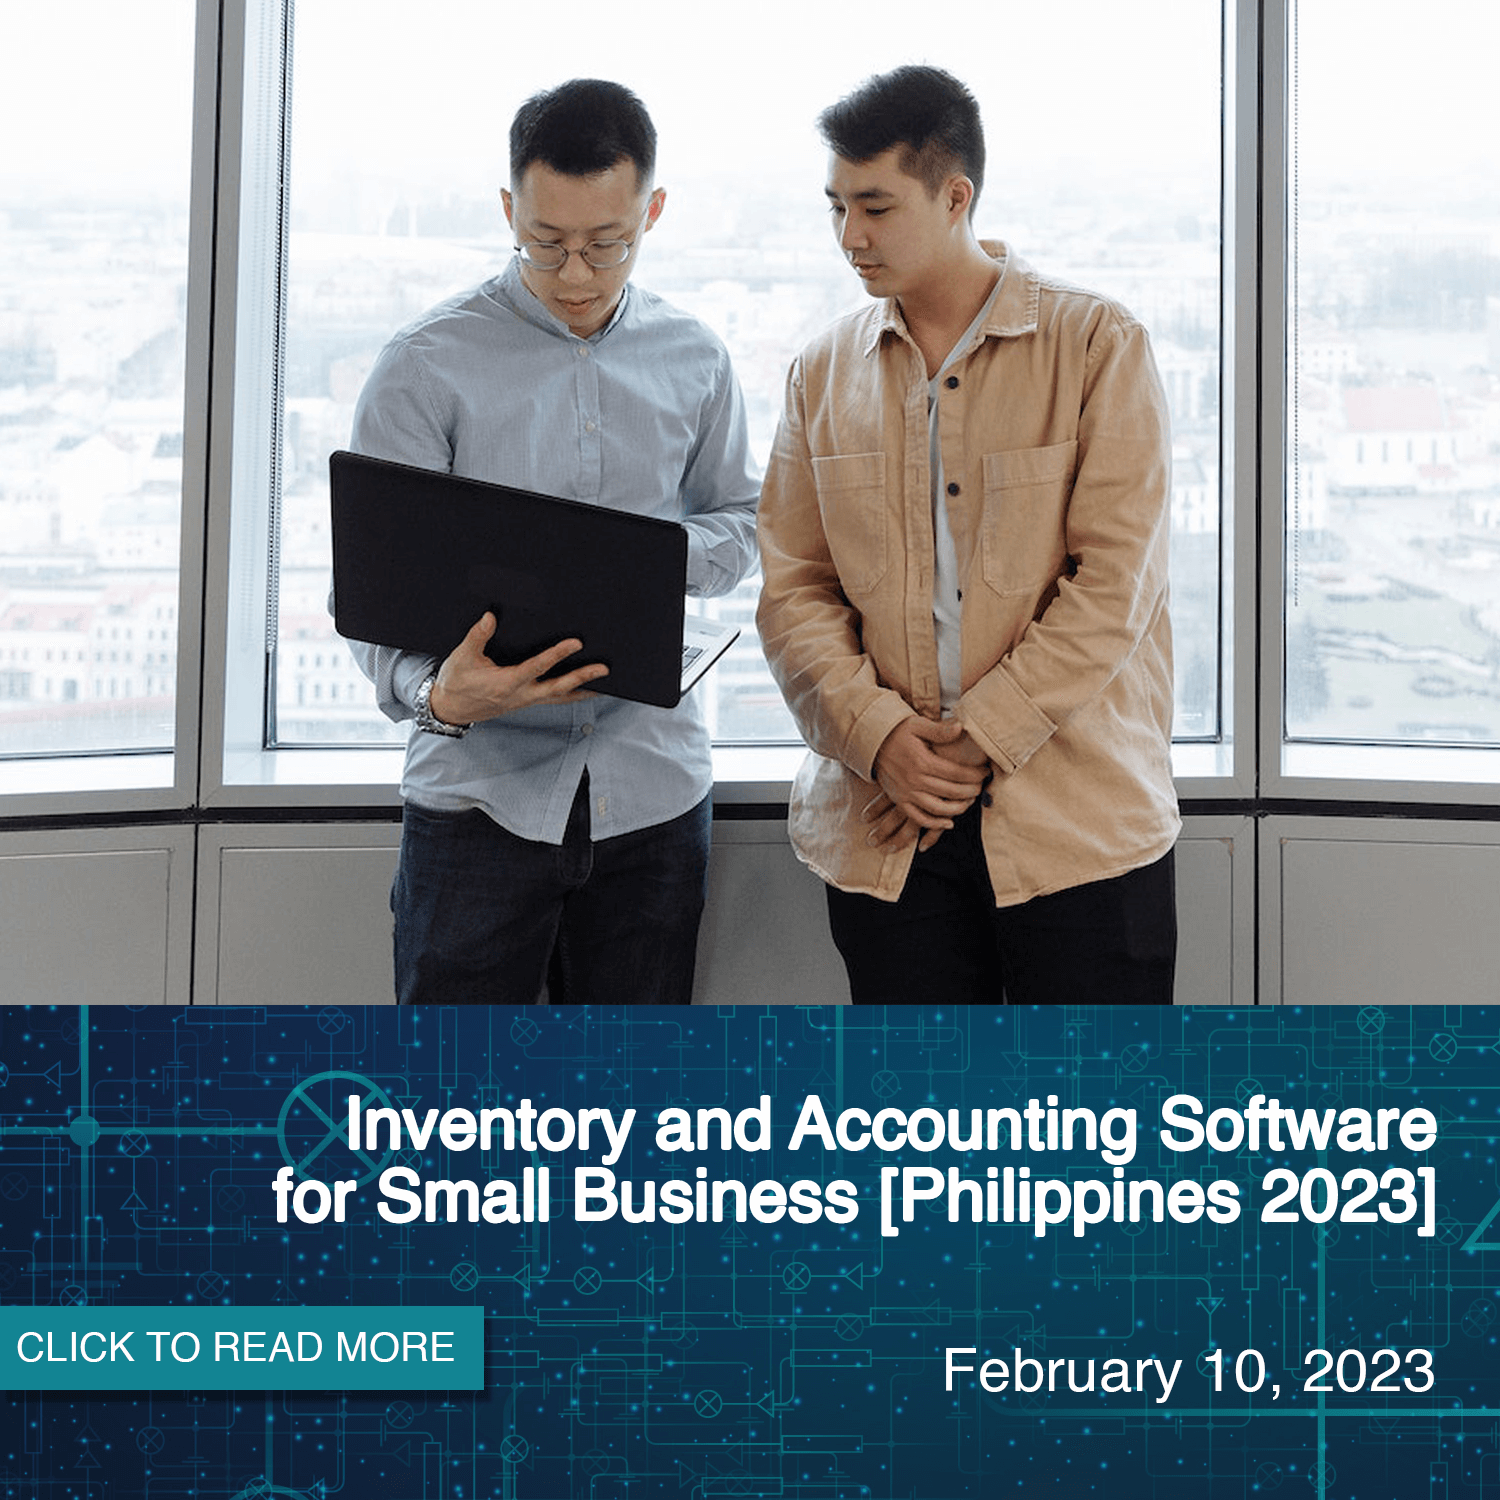 Inventory and Accounting Software for Small Business